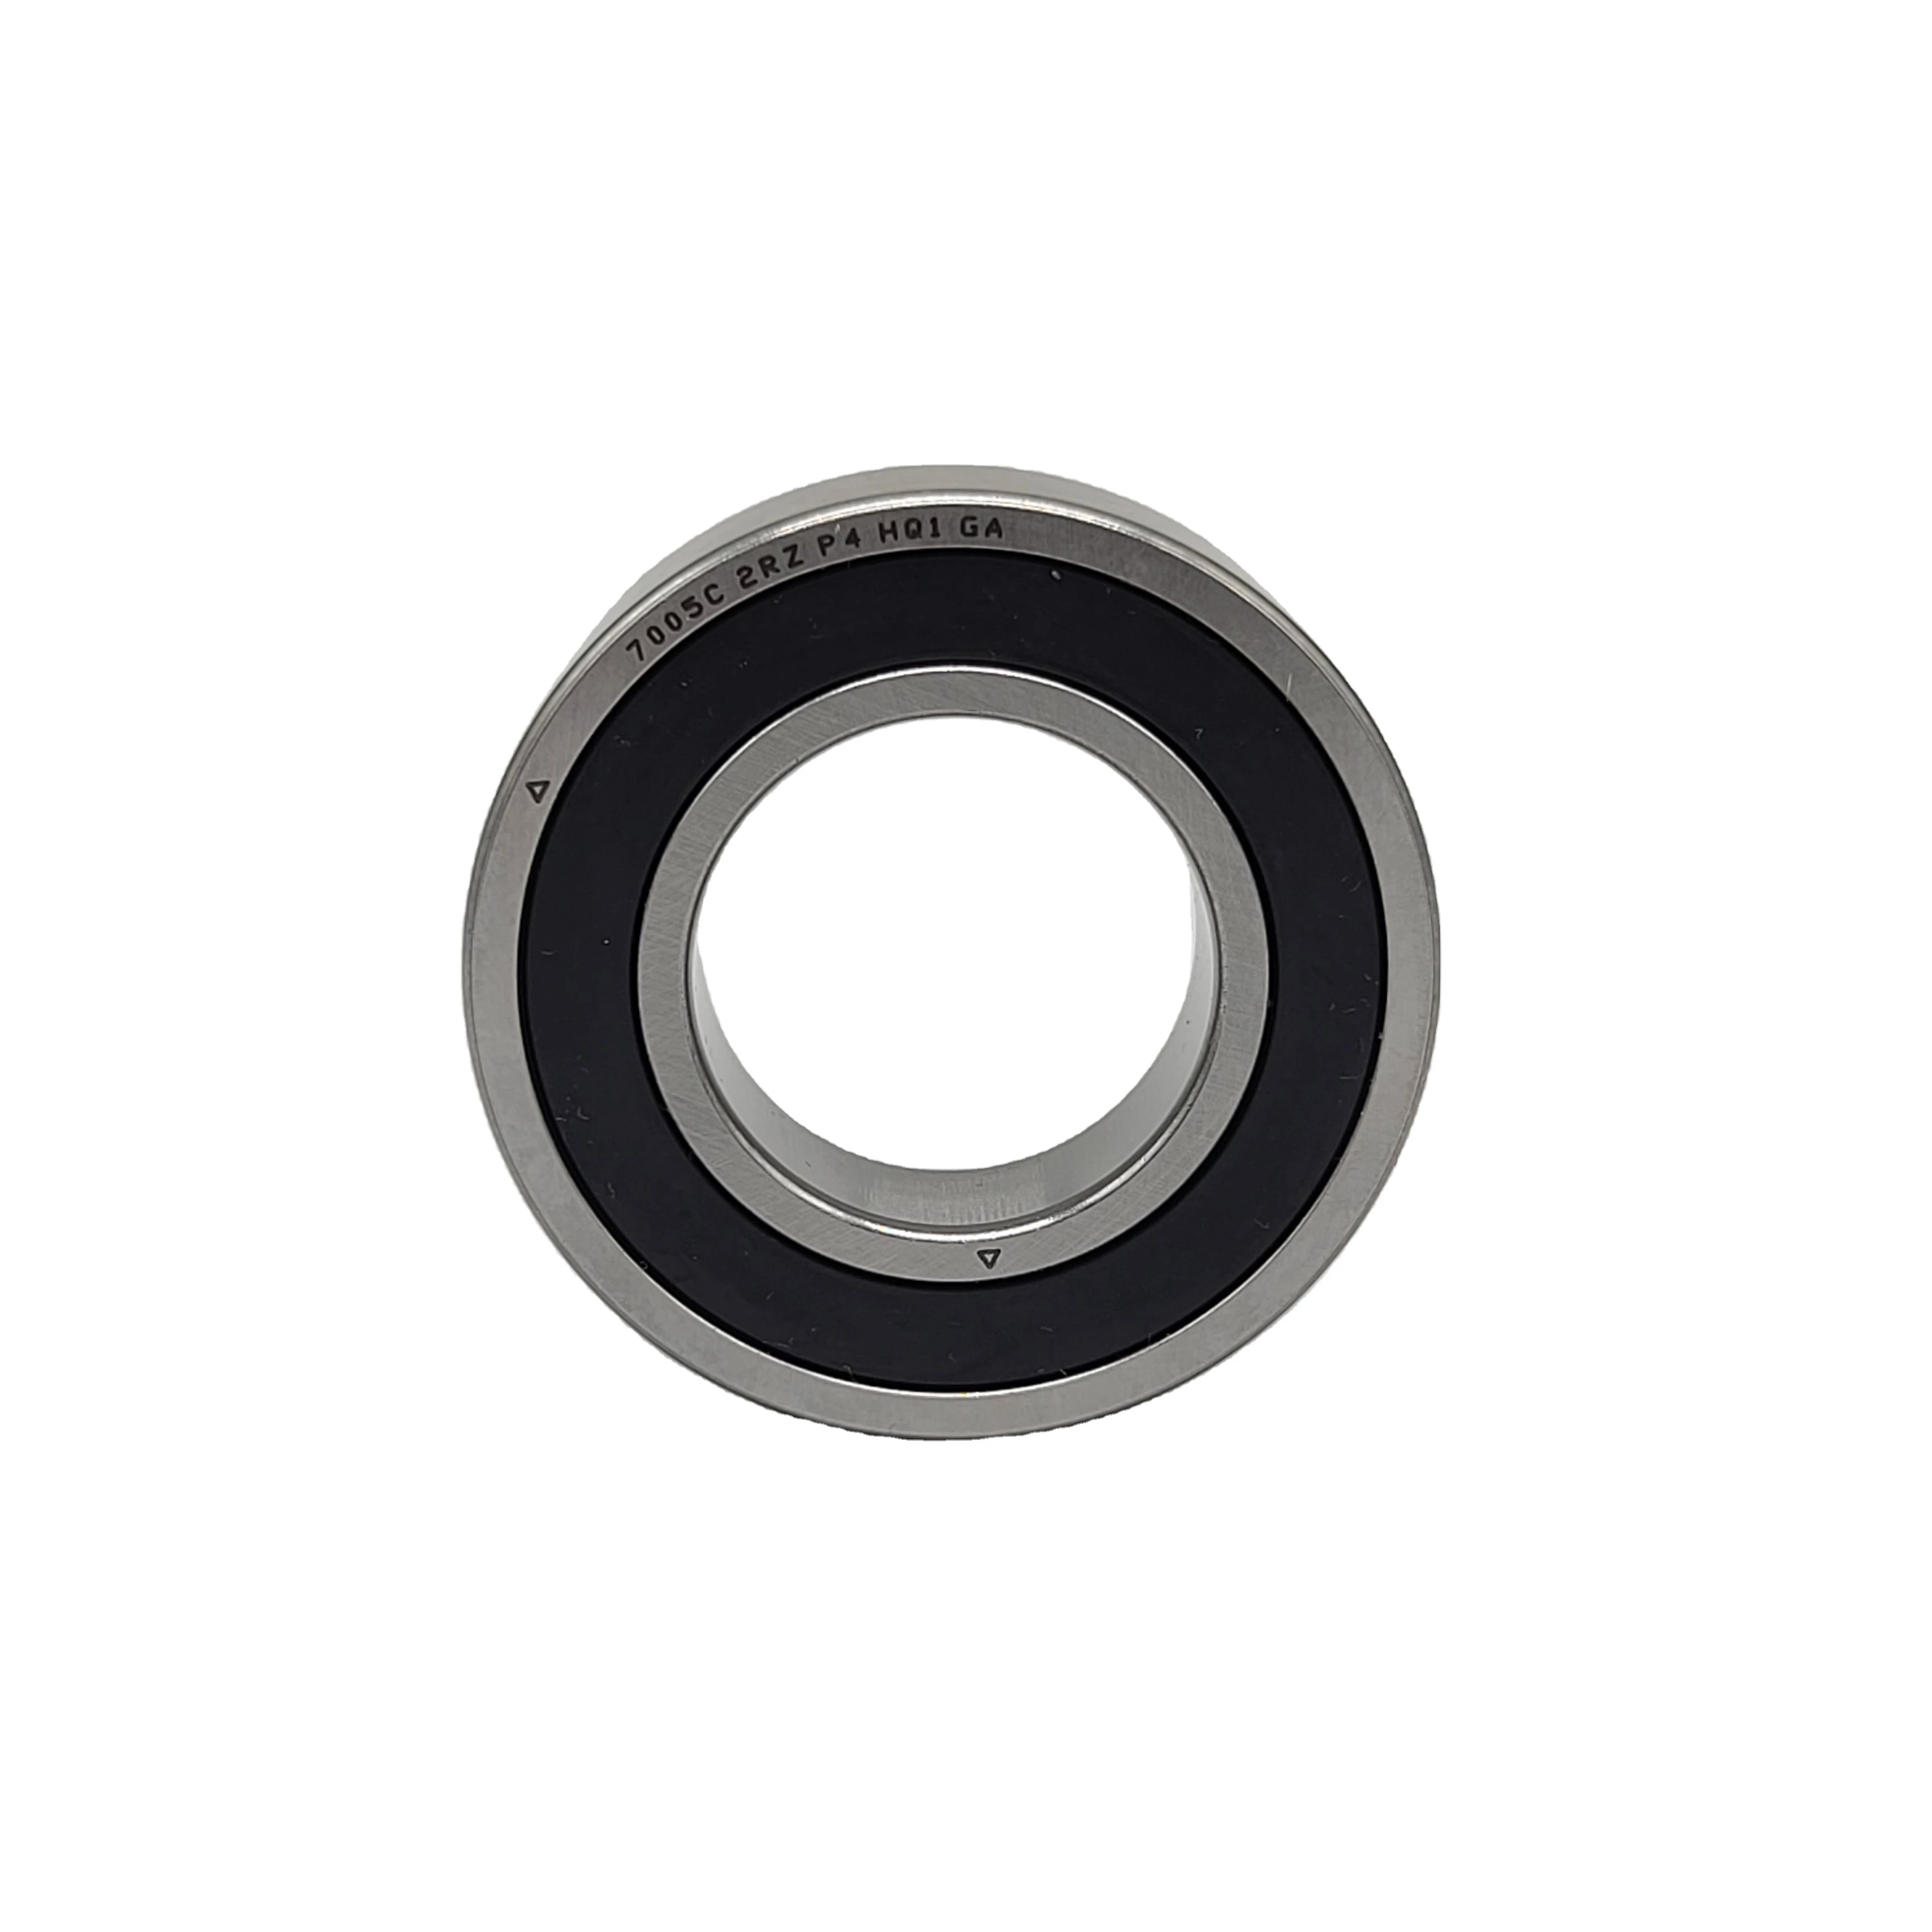 XEZ high speed precision electric ceramic 7005 angular contact ball bearing factory matched bearings size cnc spindle bearing